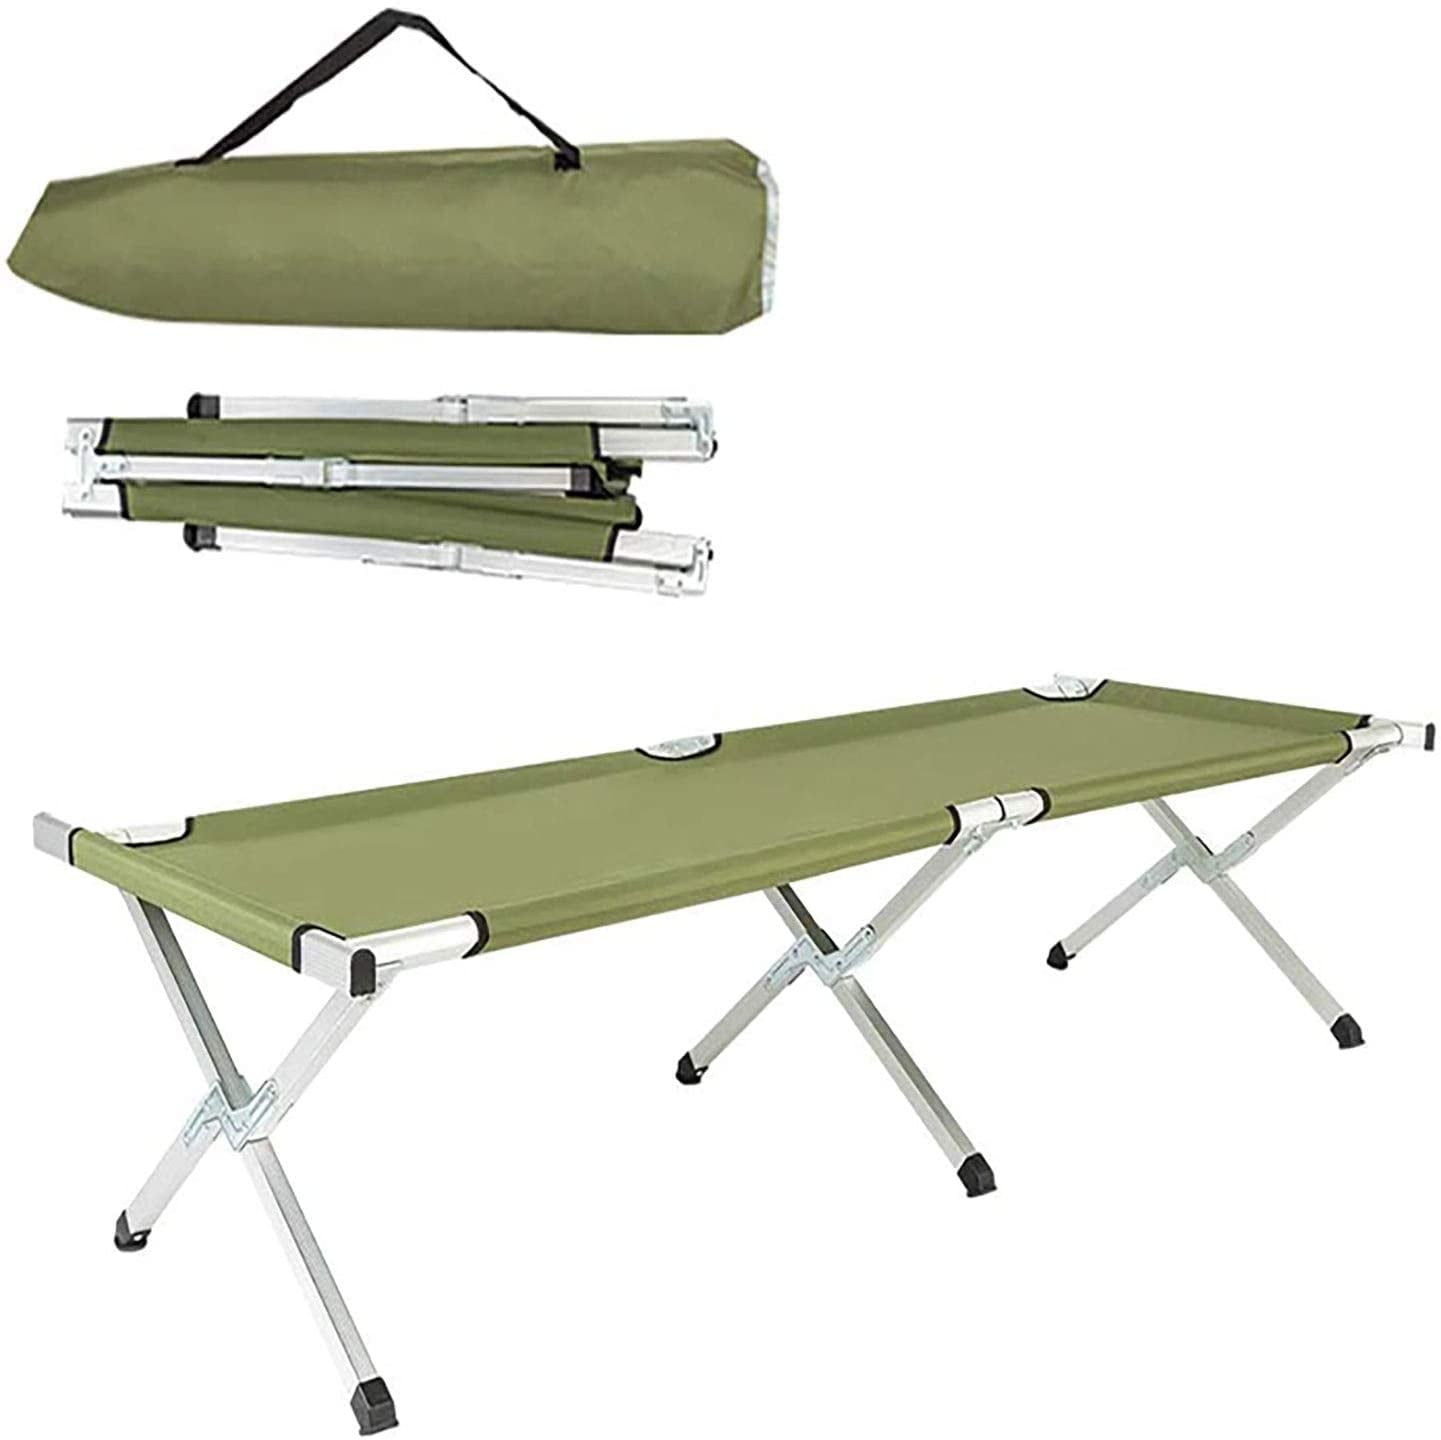 Portable Folding Camping Cot With Carrying Case Military Style Fold Up Hiking 